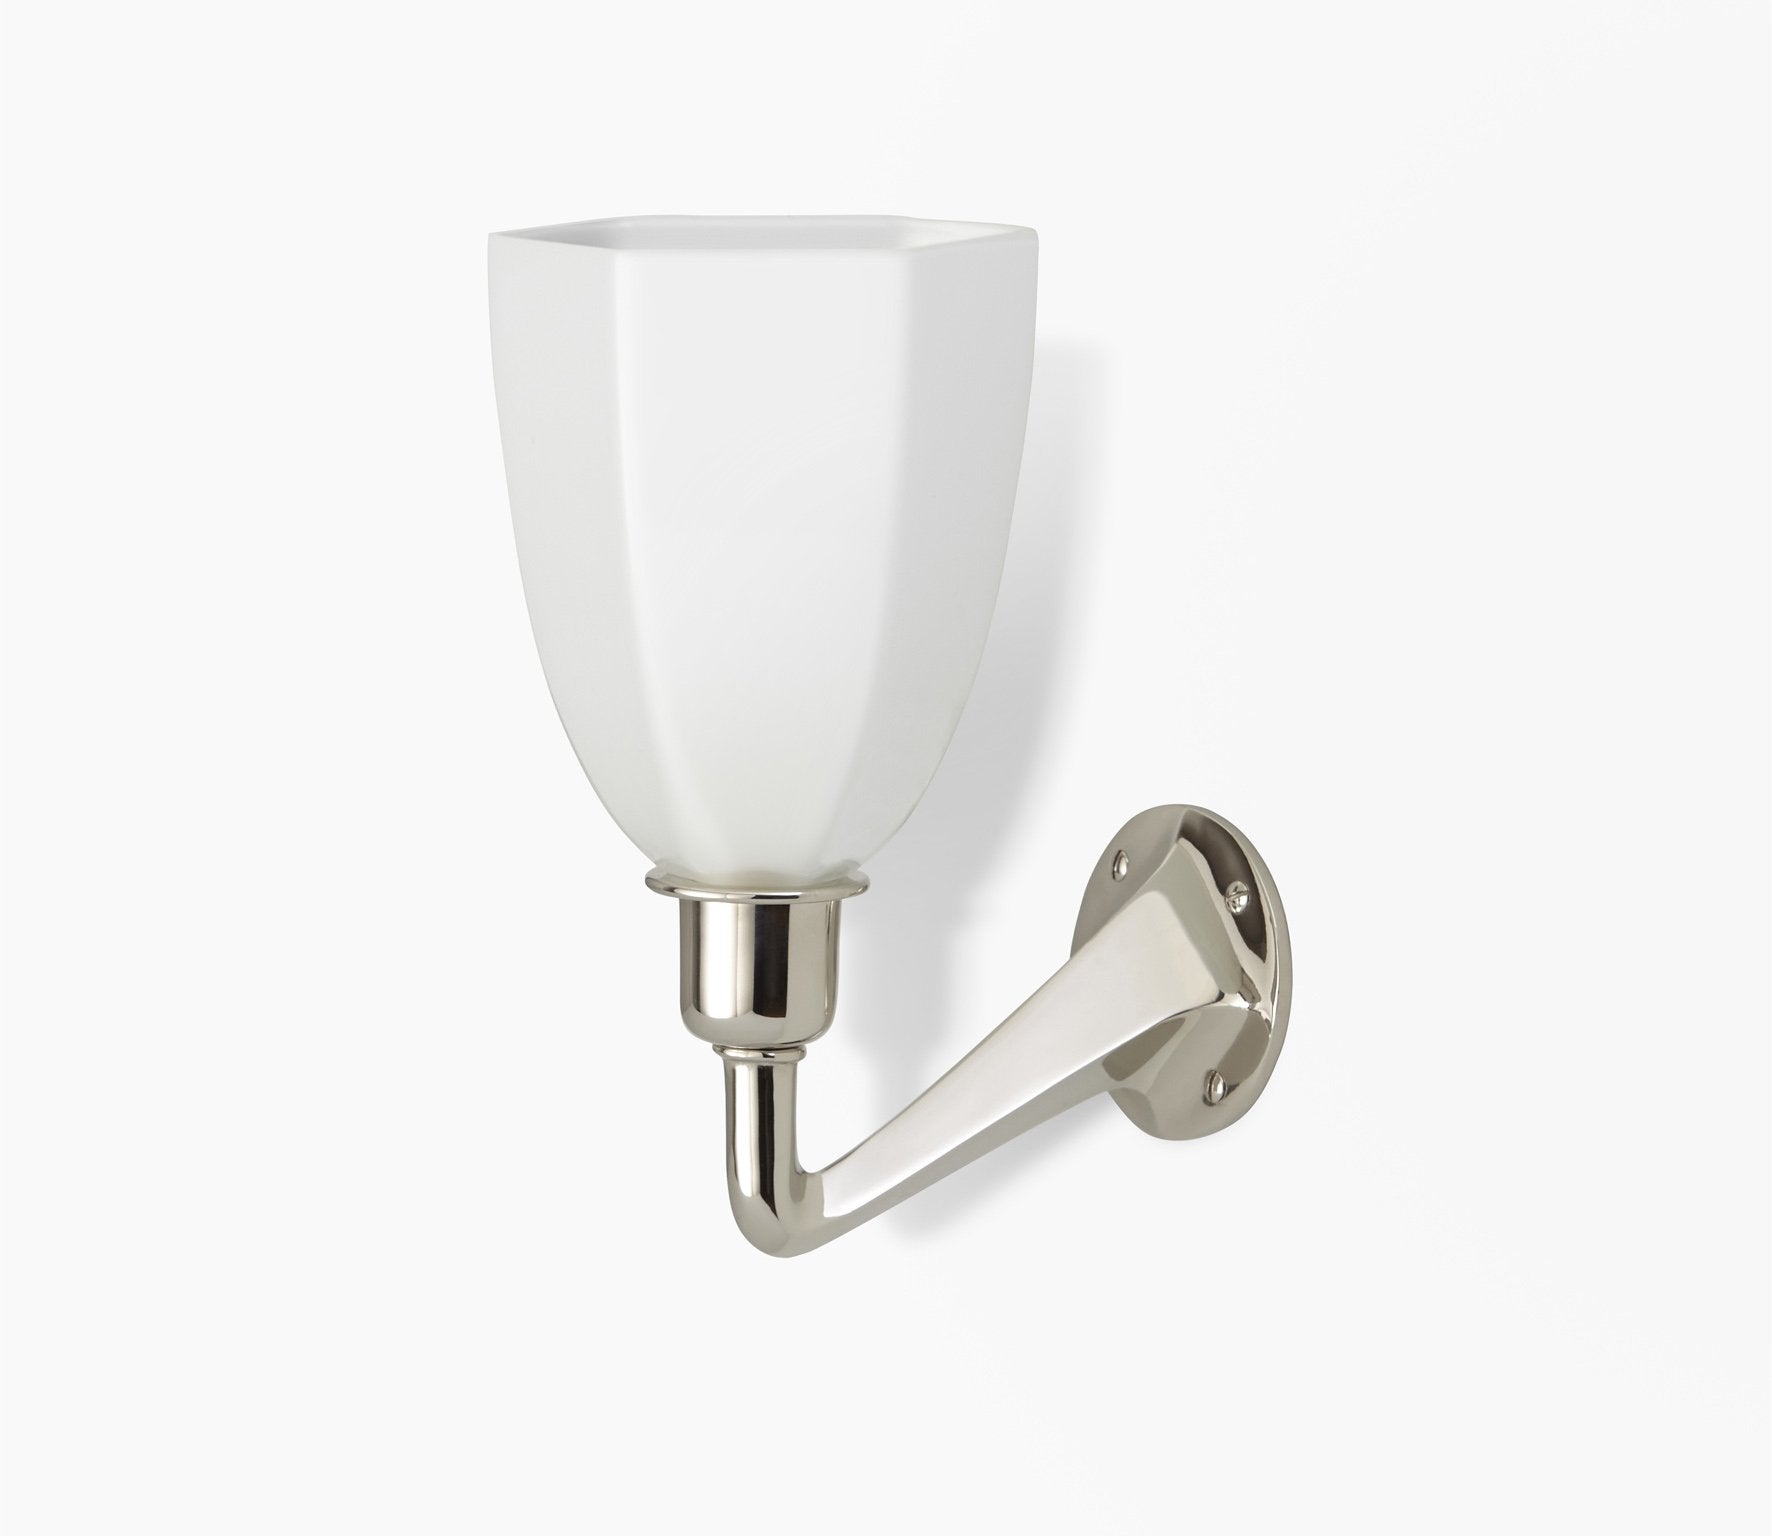 Leila Wall Light with Glass Shade Product Image 1